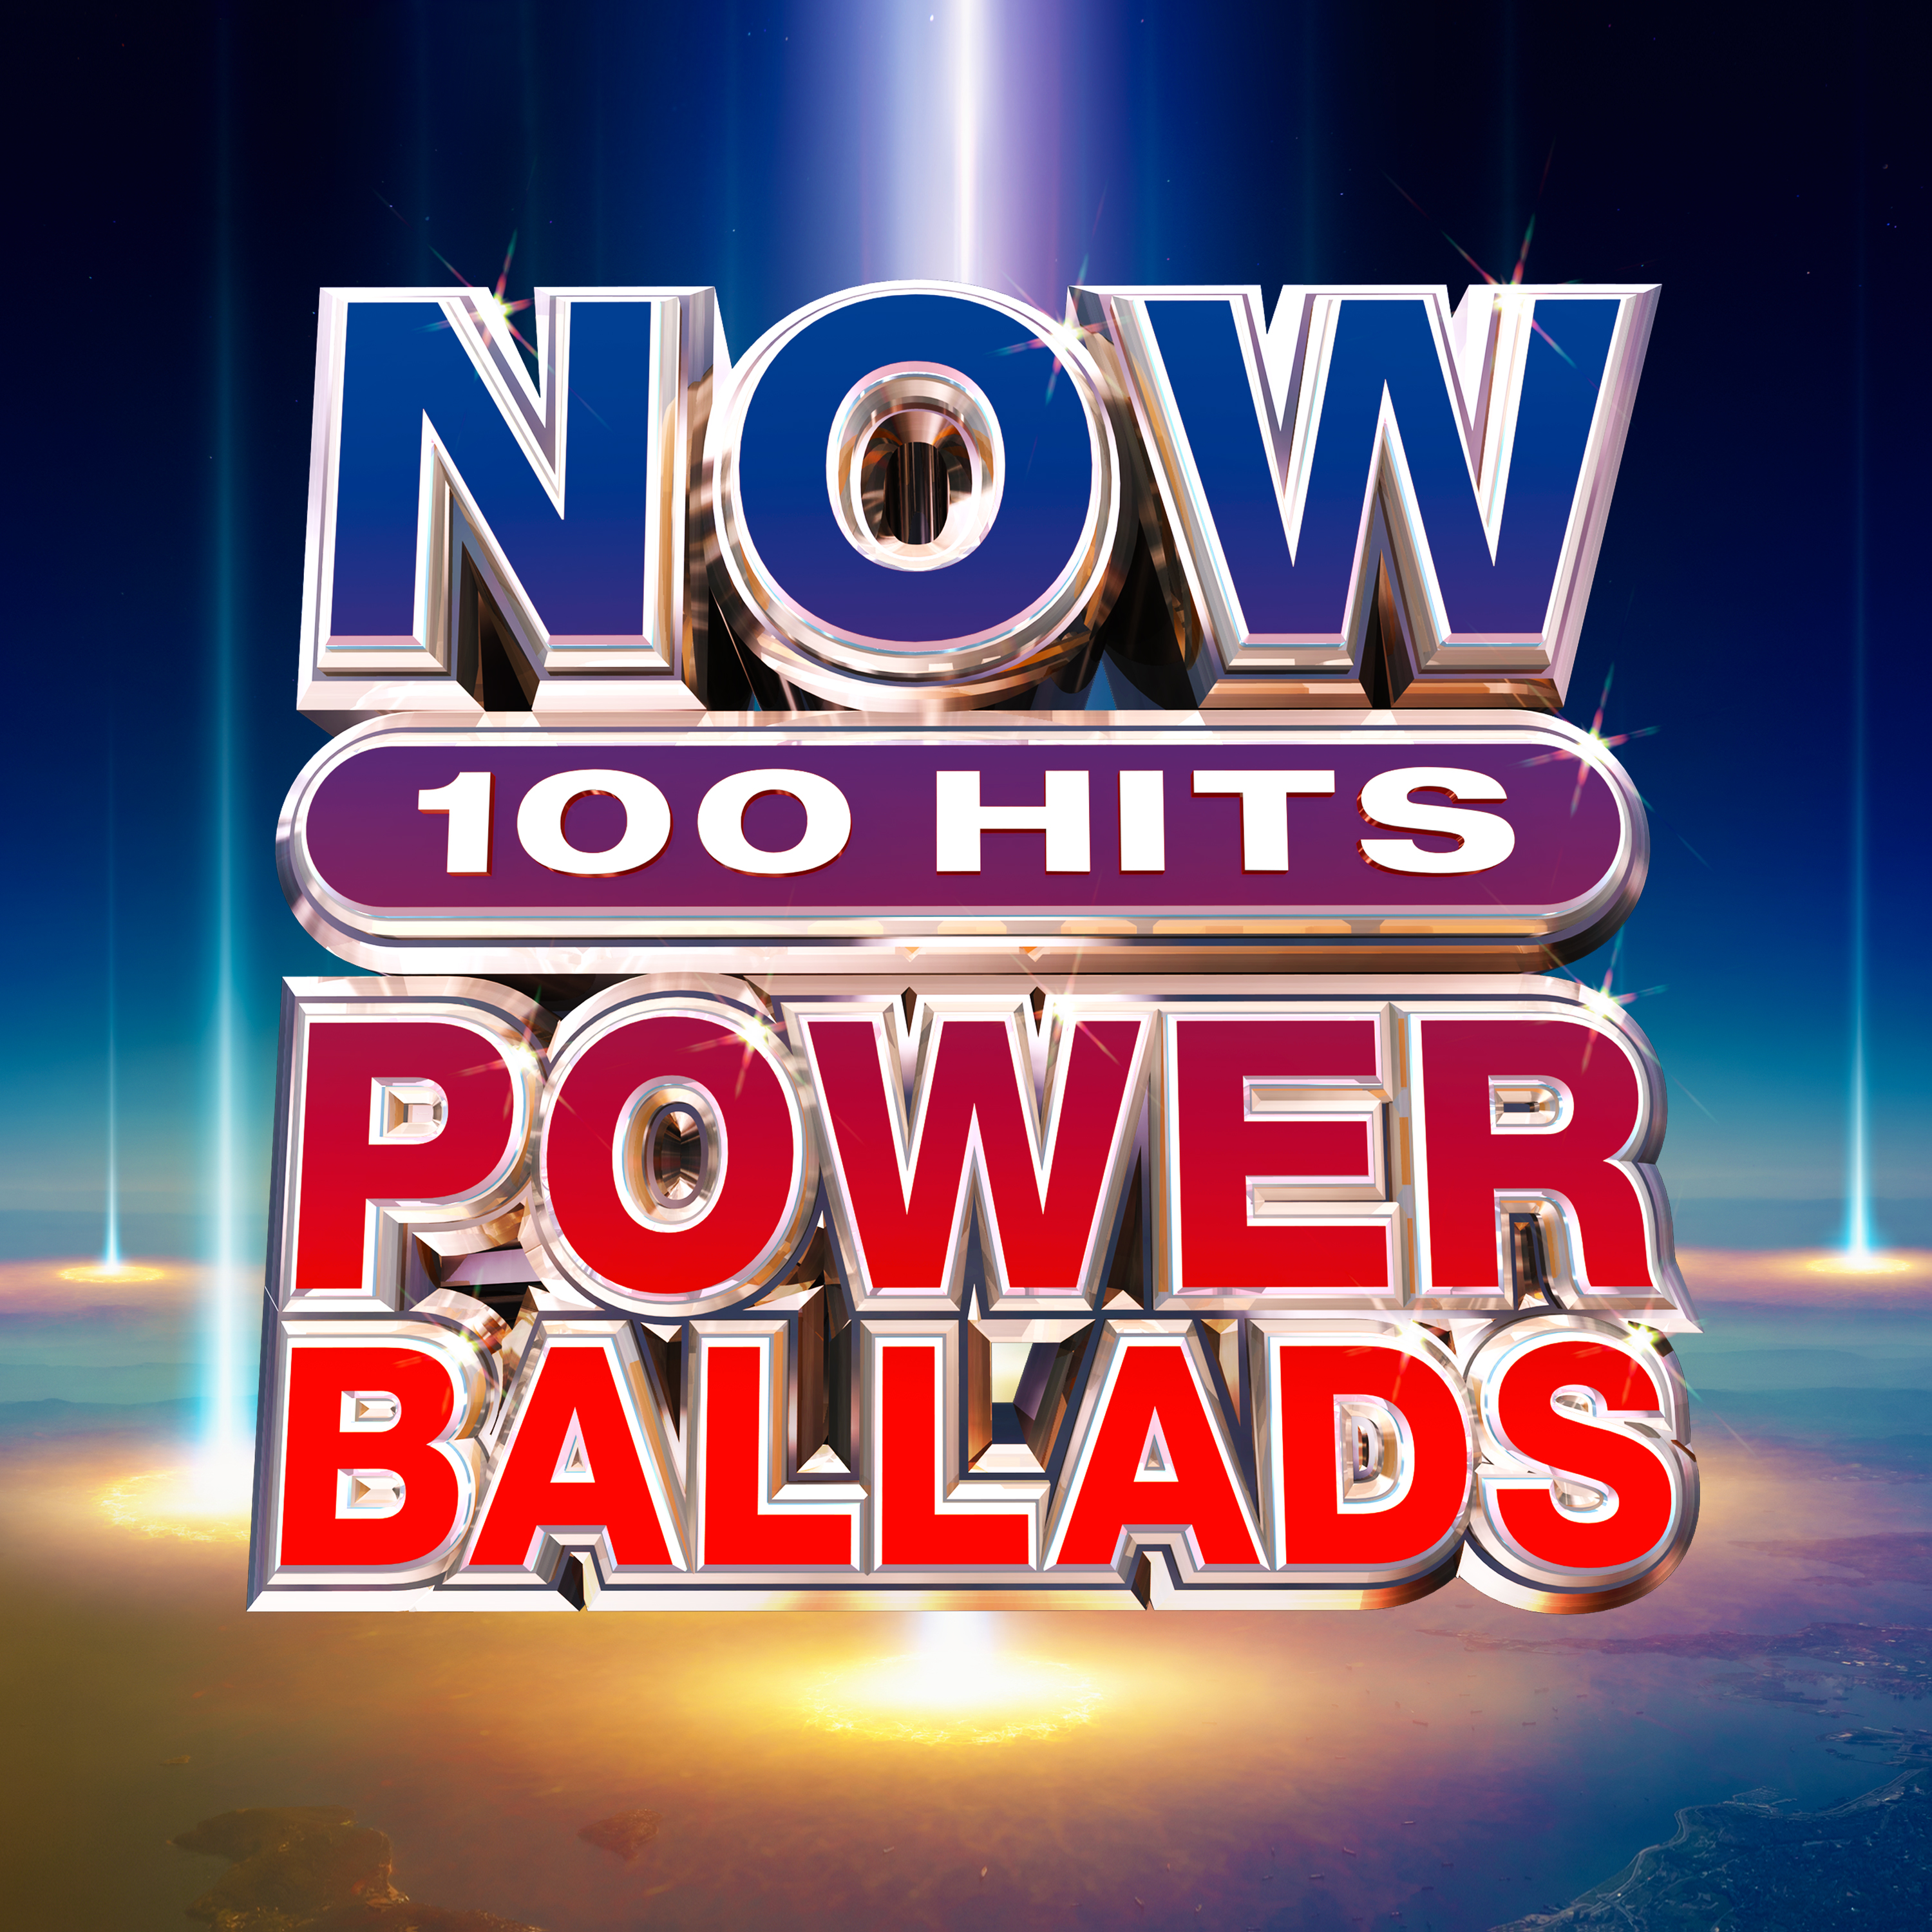 what songs are on the now thats what i call music 100